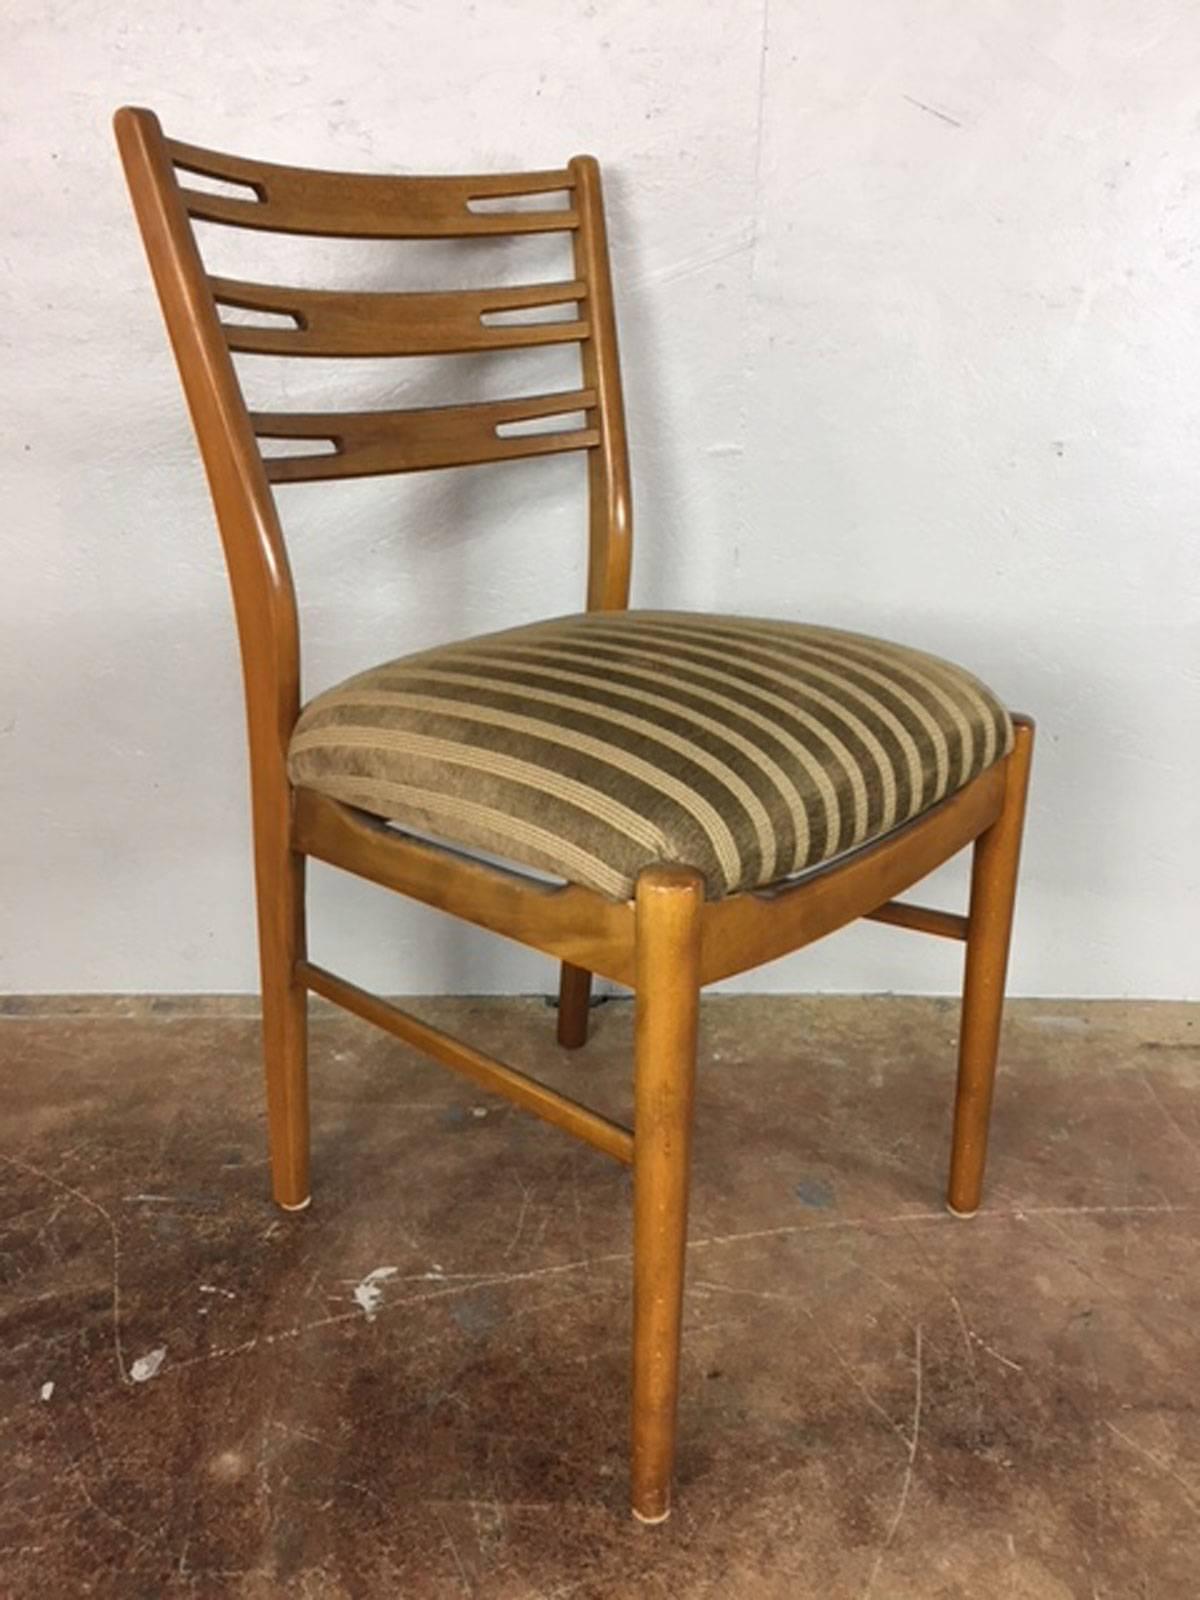 Set of four upholstered walnut dining chairs and table with one leaf by Falstrup of Denmark. Table is 43